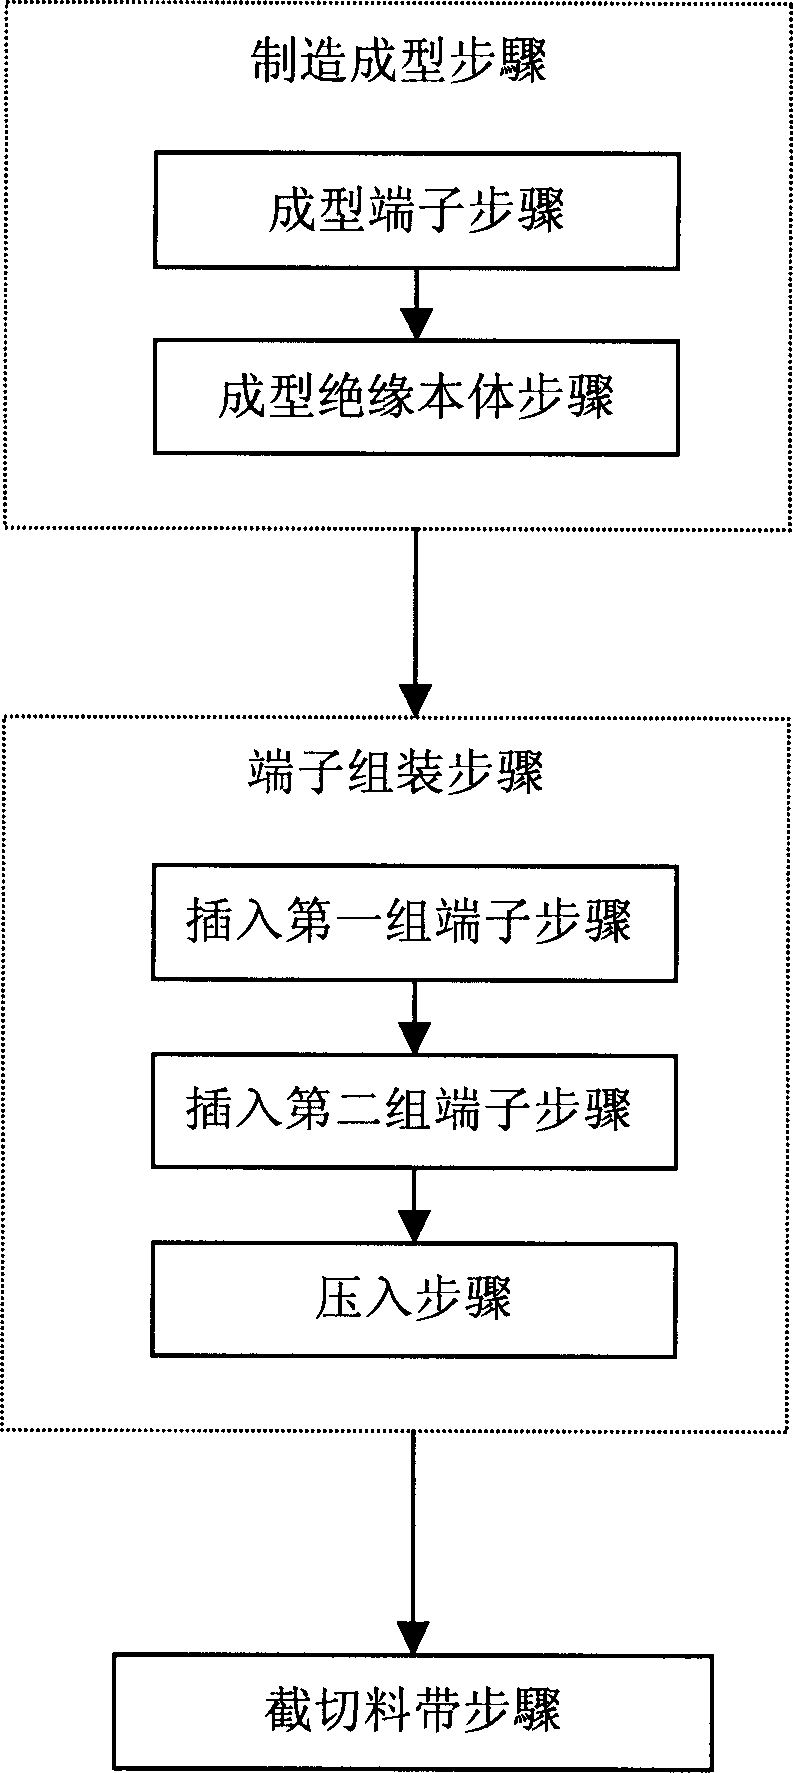 Method for producing electric connecter